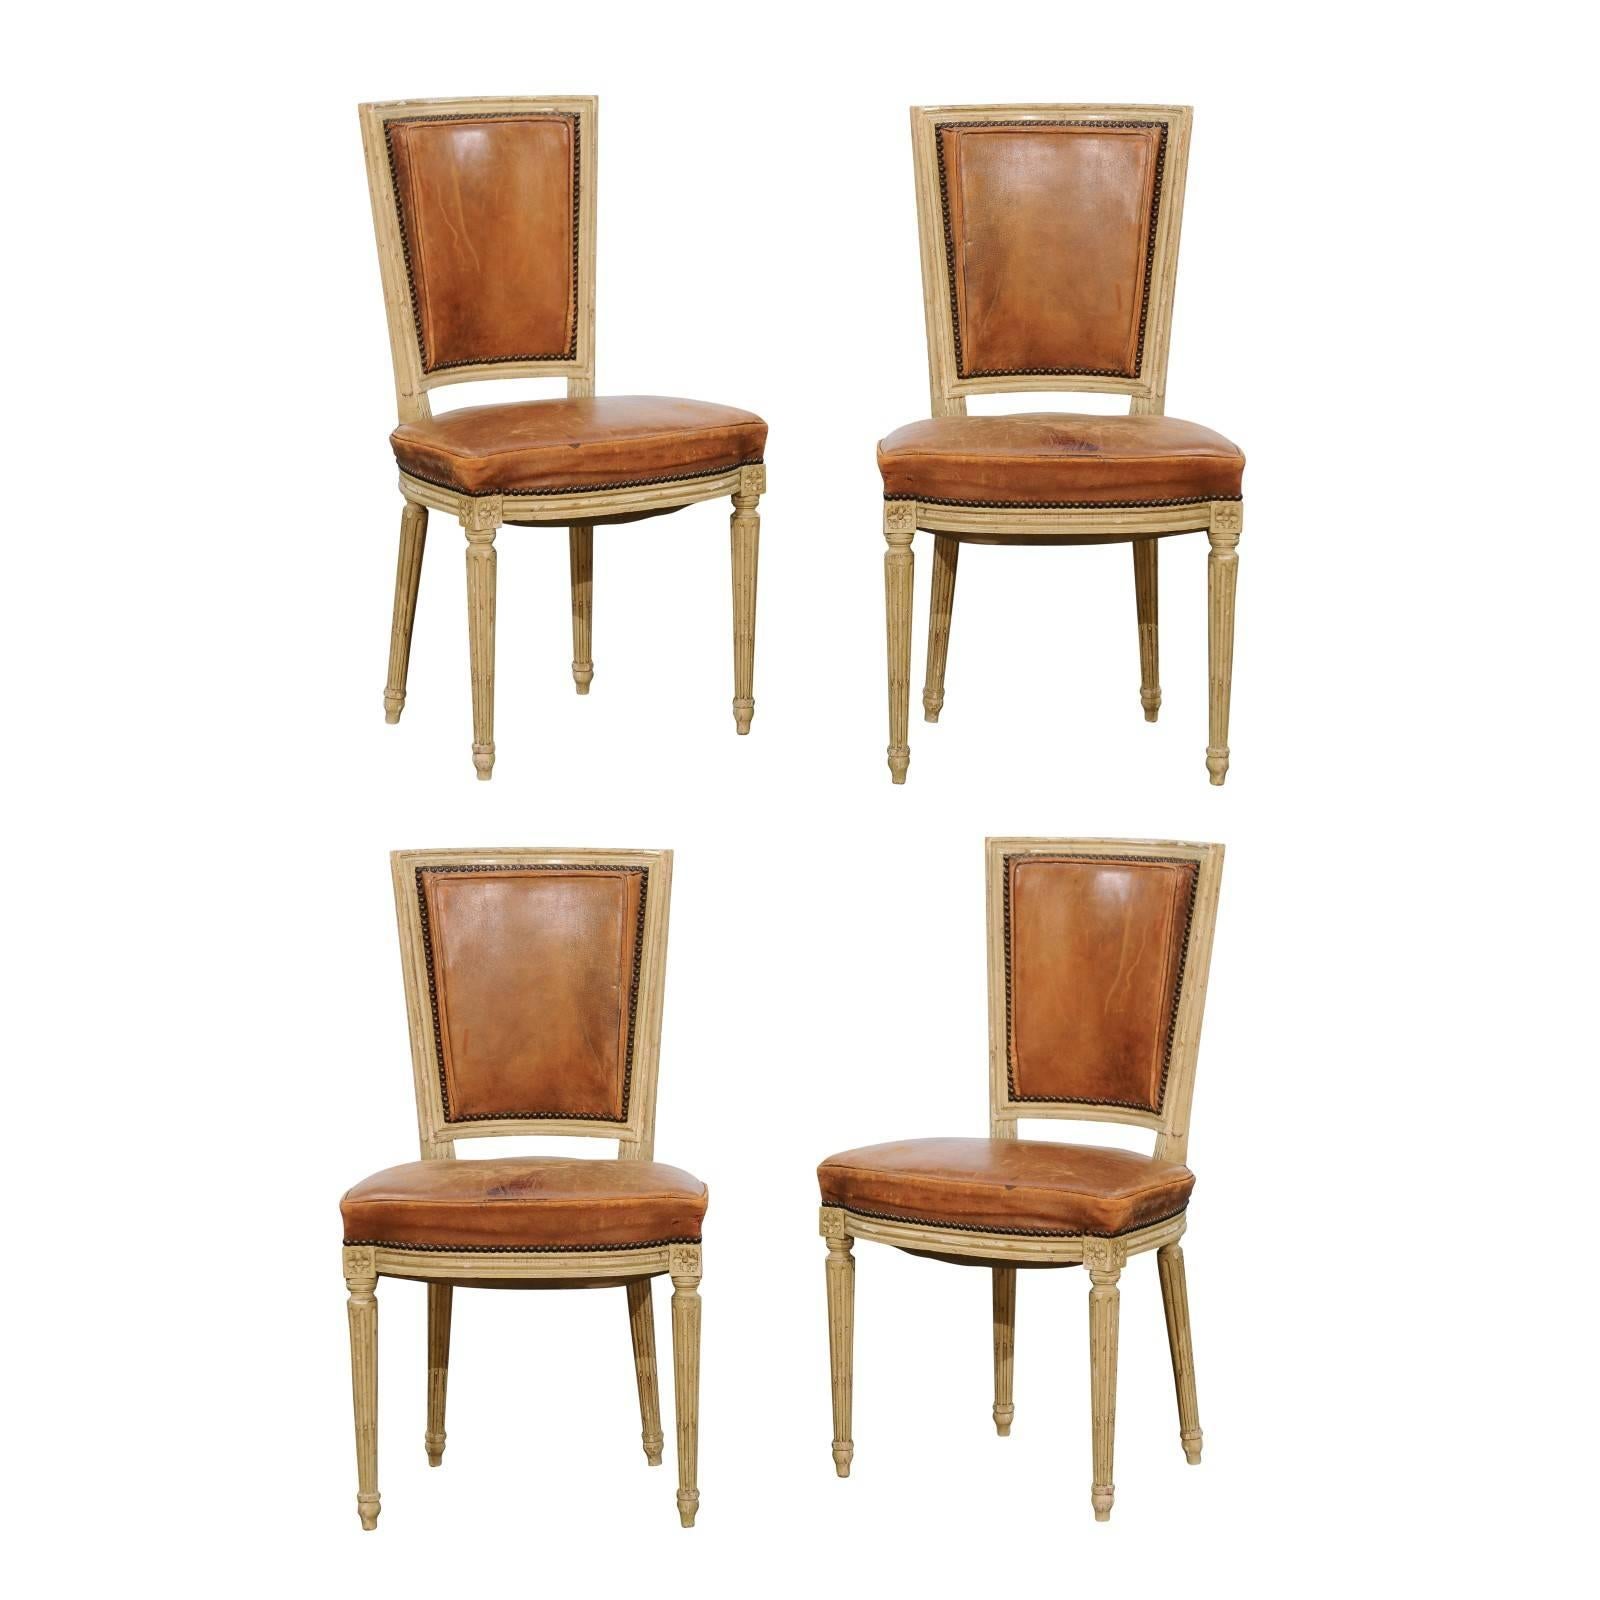 Set of Four French Louis XVI Style Chairs with Leathers Seats, circa 1950